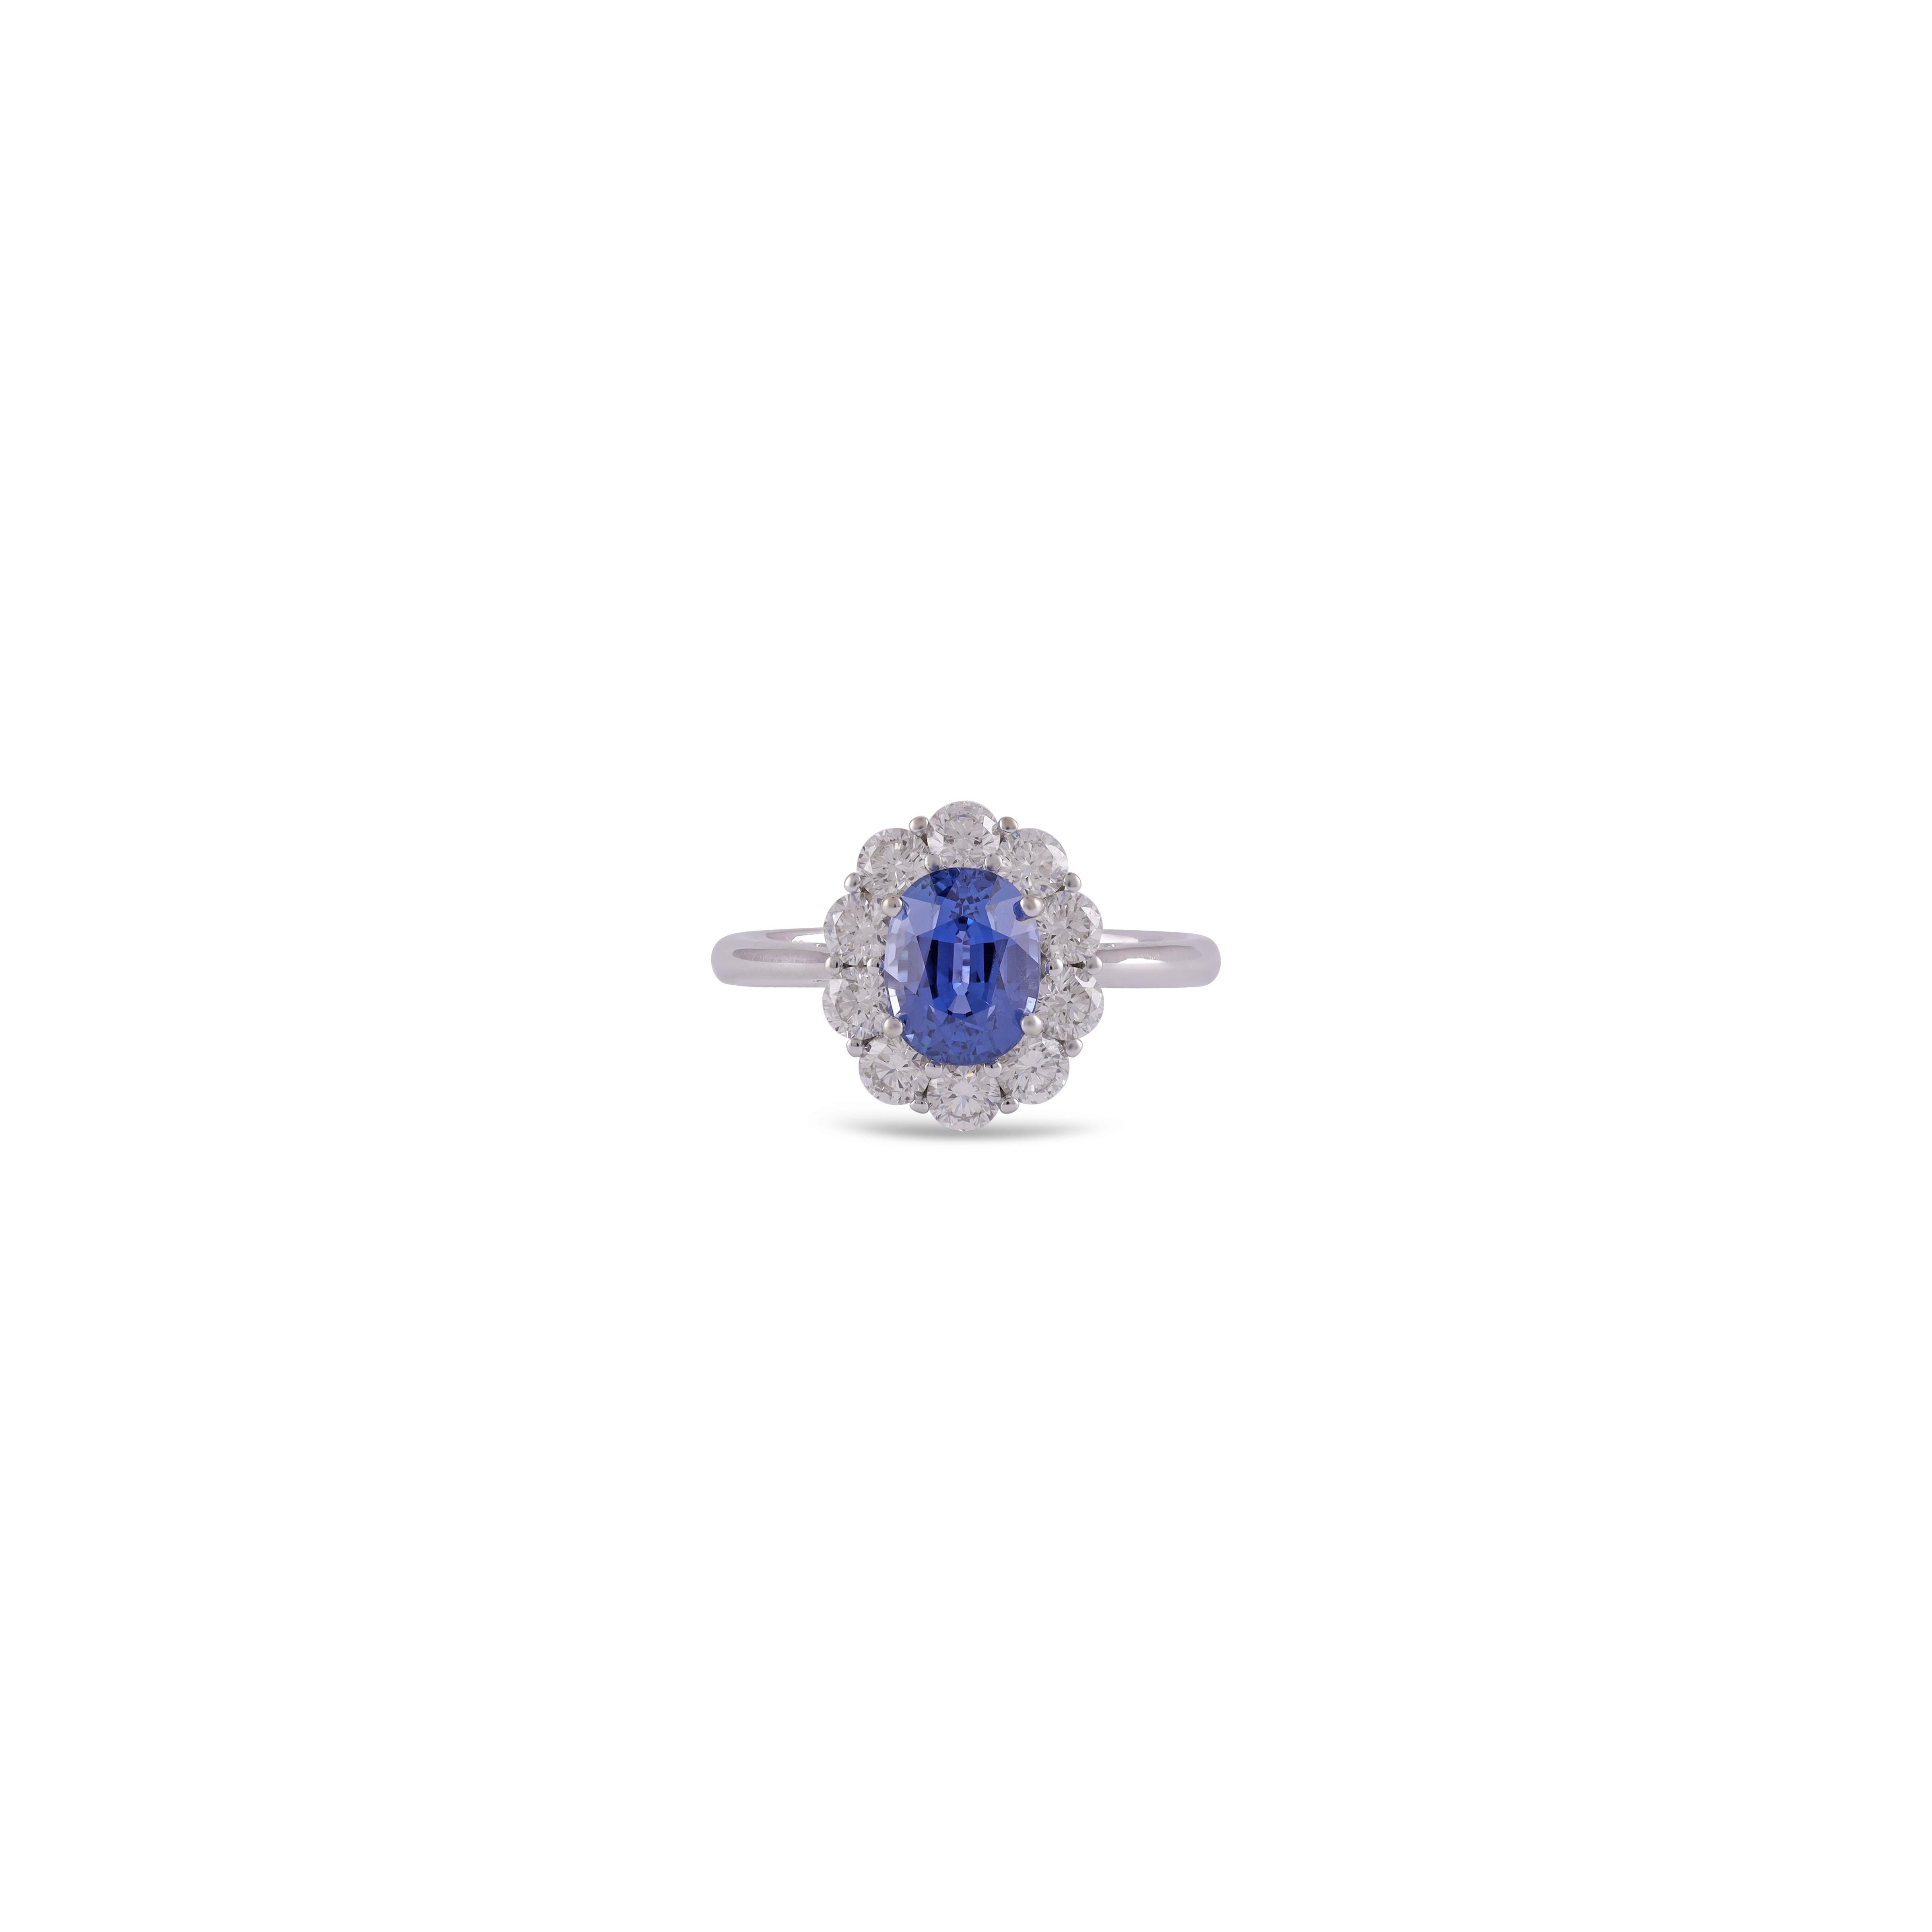 Its an exclusive Sapphire & diamond ring studded in 18k White gold with 1 piece of Sapphire weight 2.00 carat with 10 pieces of diamonds weight 0.95 carat this entire ring is studded in 18k White gold , ring size can be change as per the